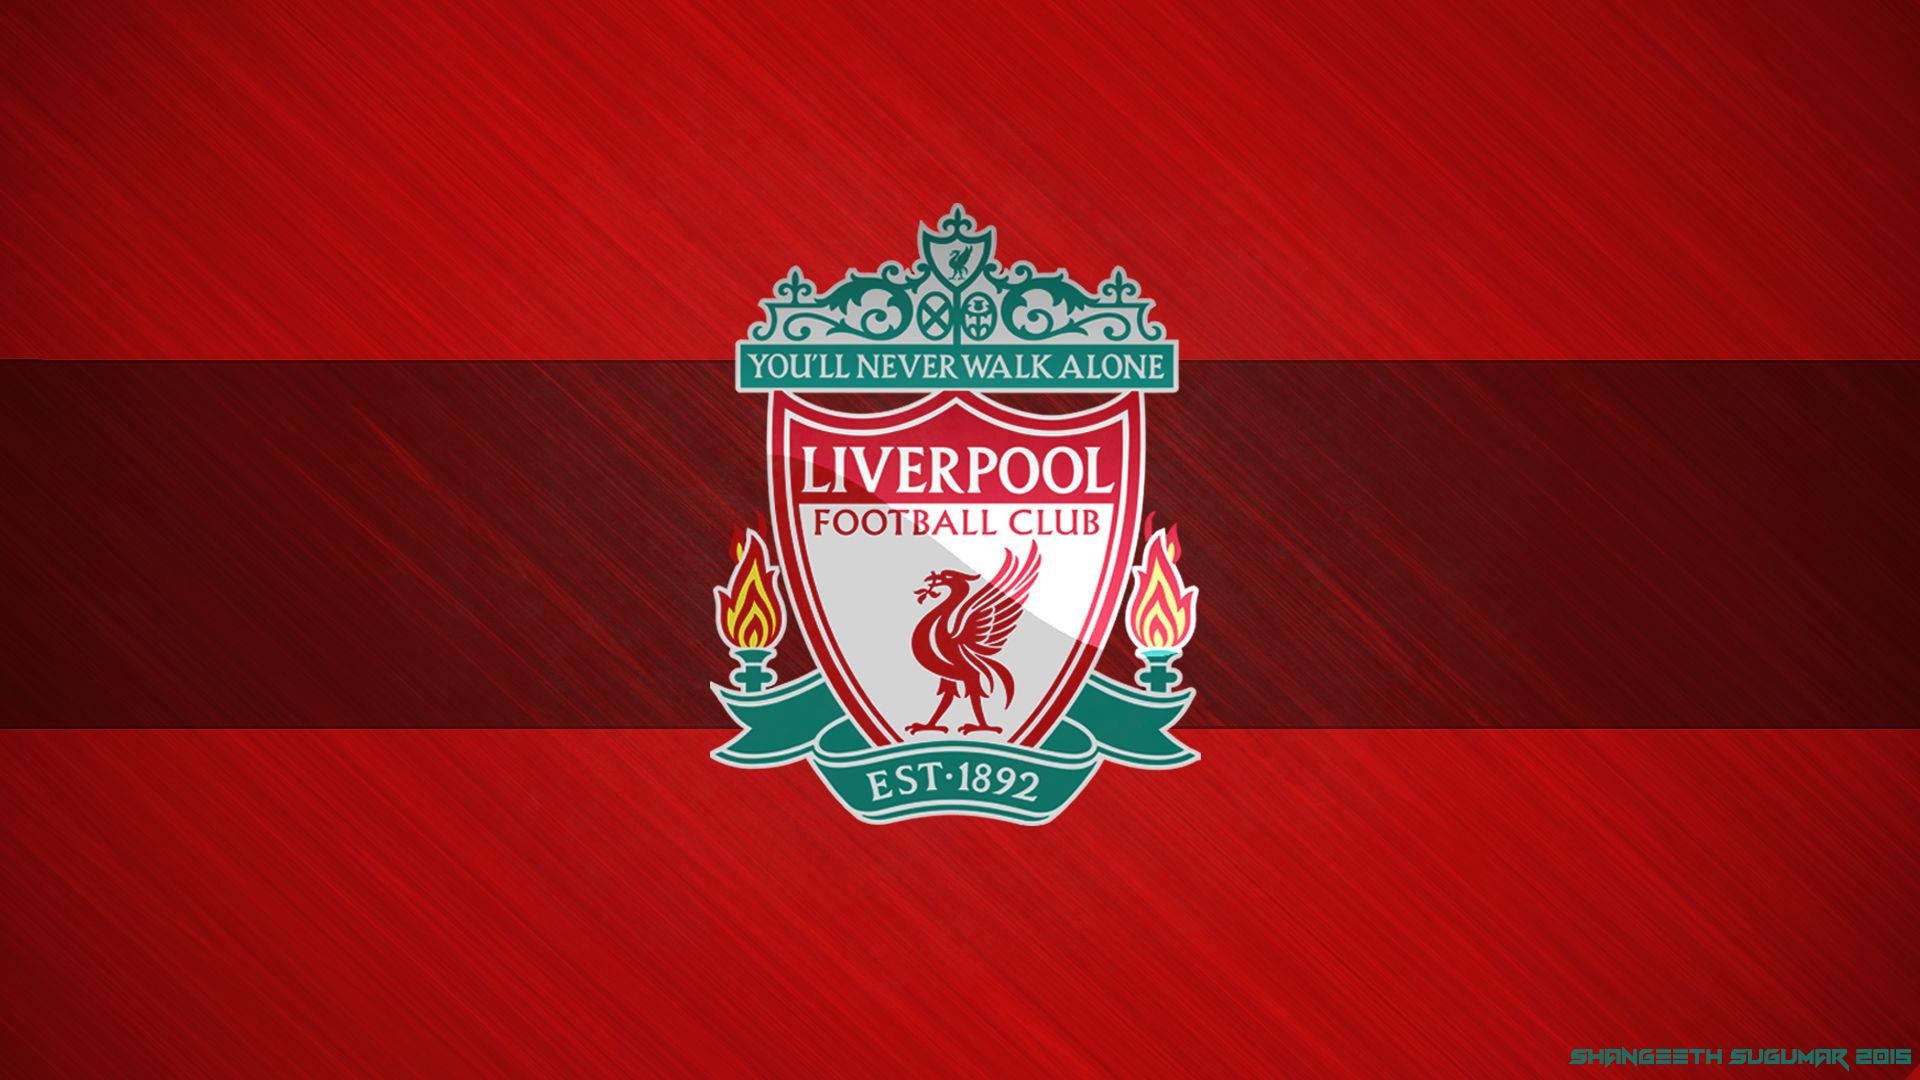 Liverpool Fc In Red Stripes